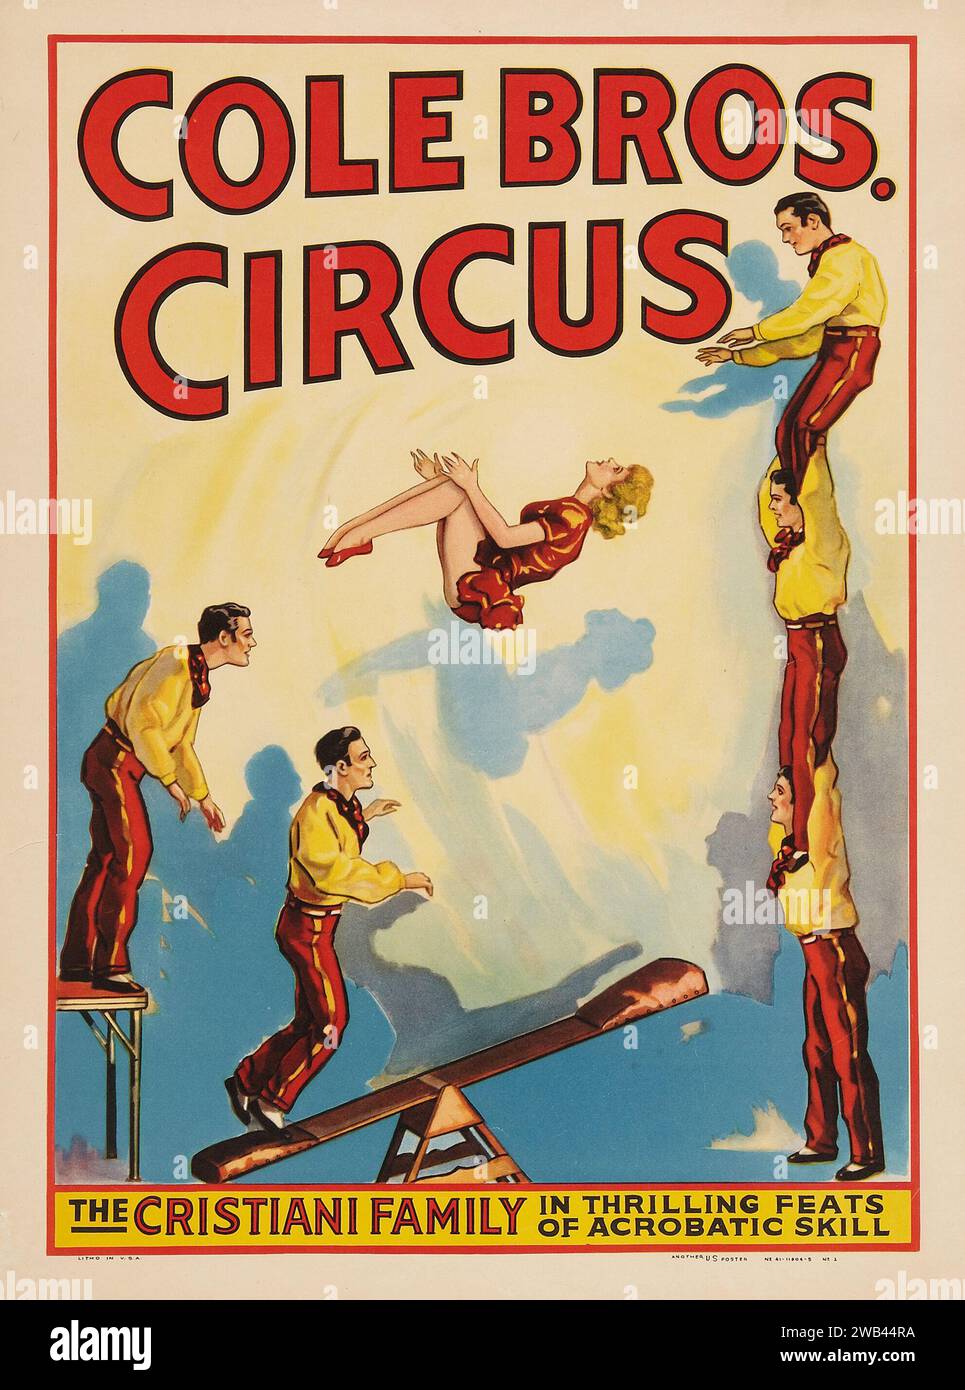 Cole Brothers Circus (1945) feat acrobatic family Cristiani Family Stock Photo